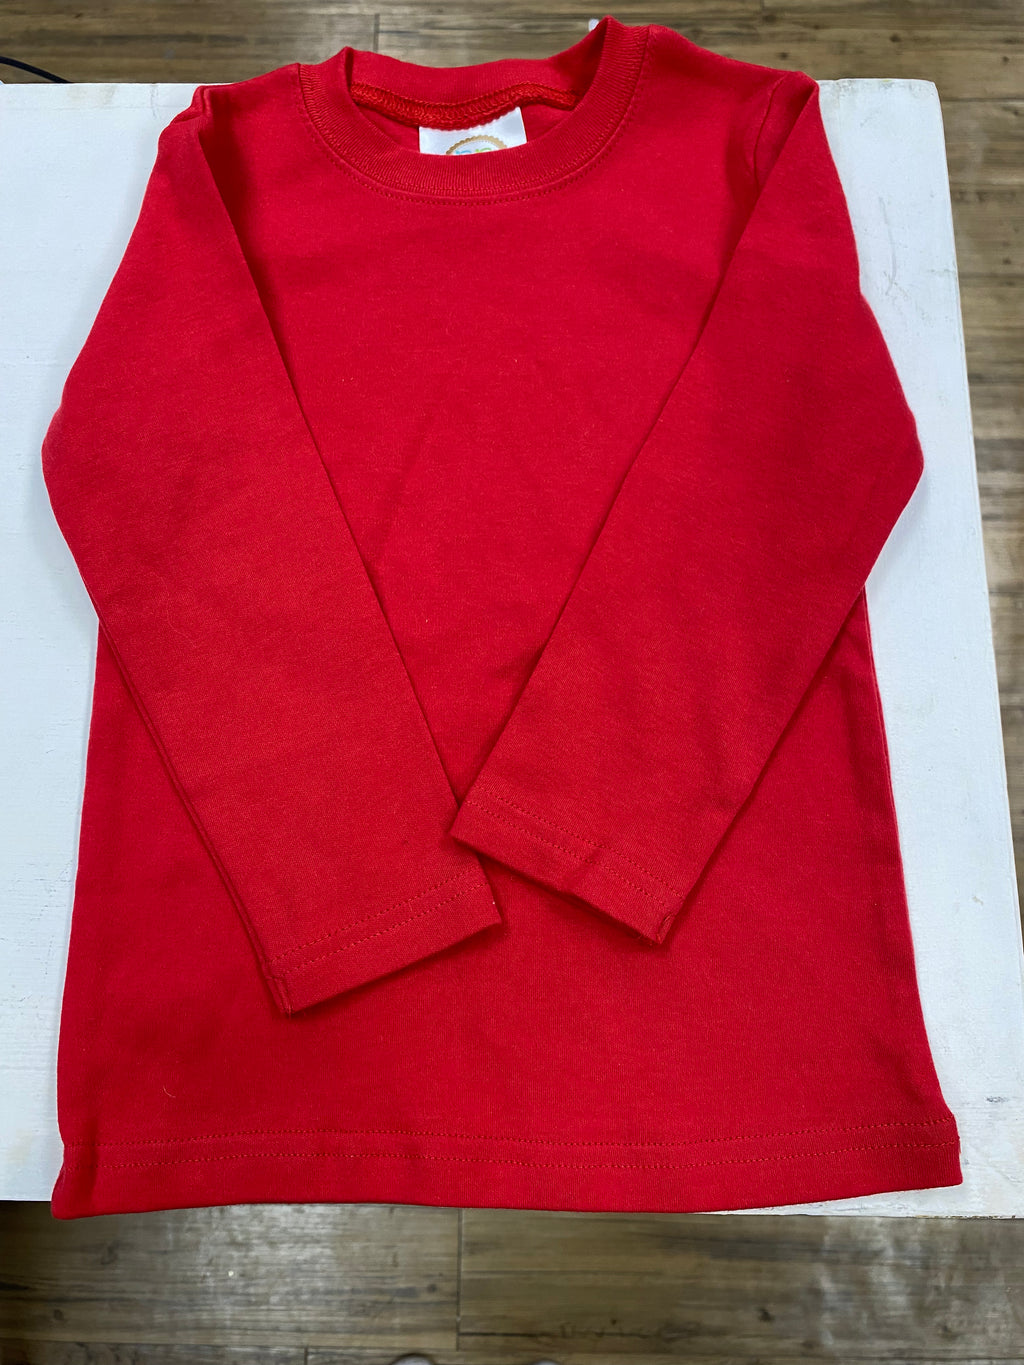 Blanks Boutique Red Long Sleeve Shirt